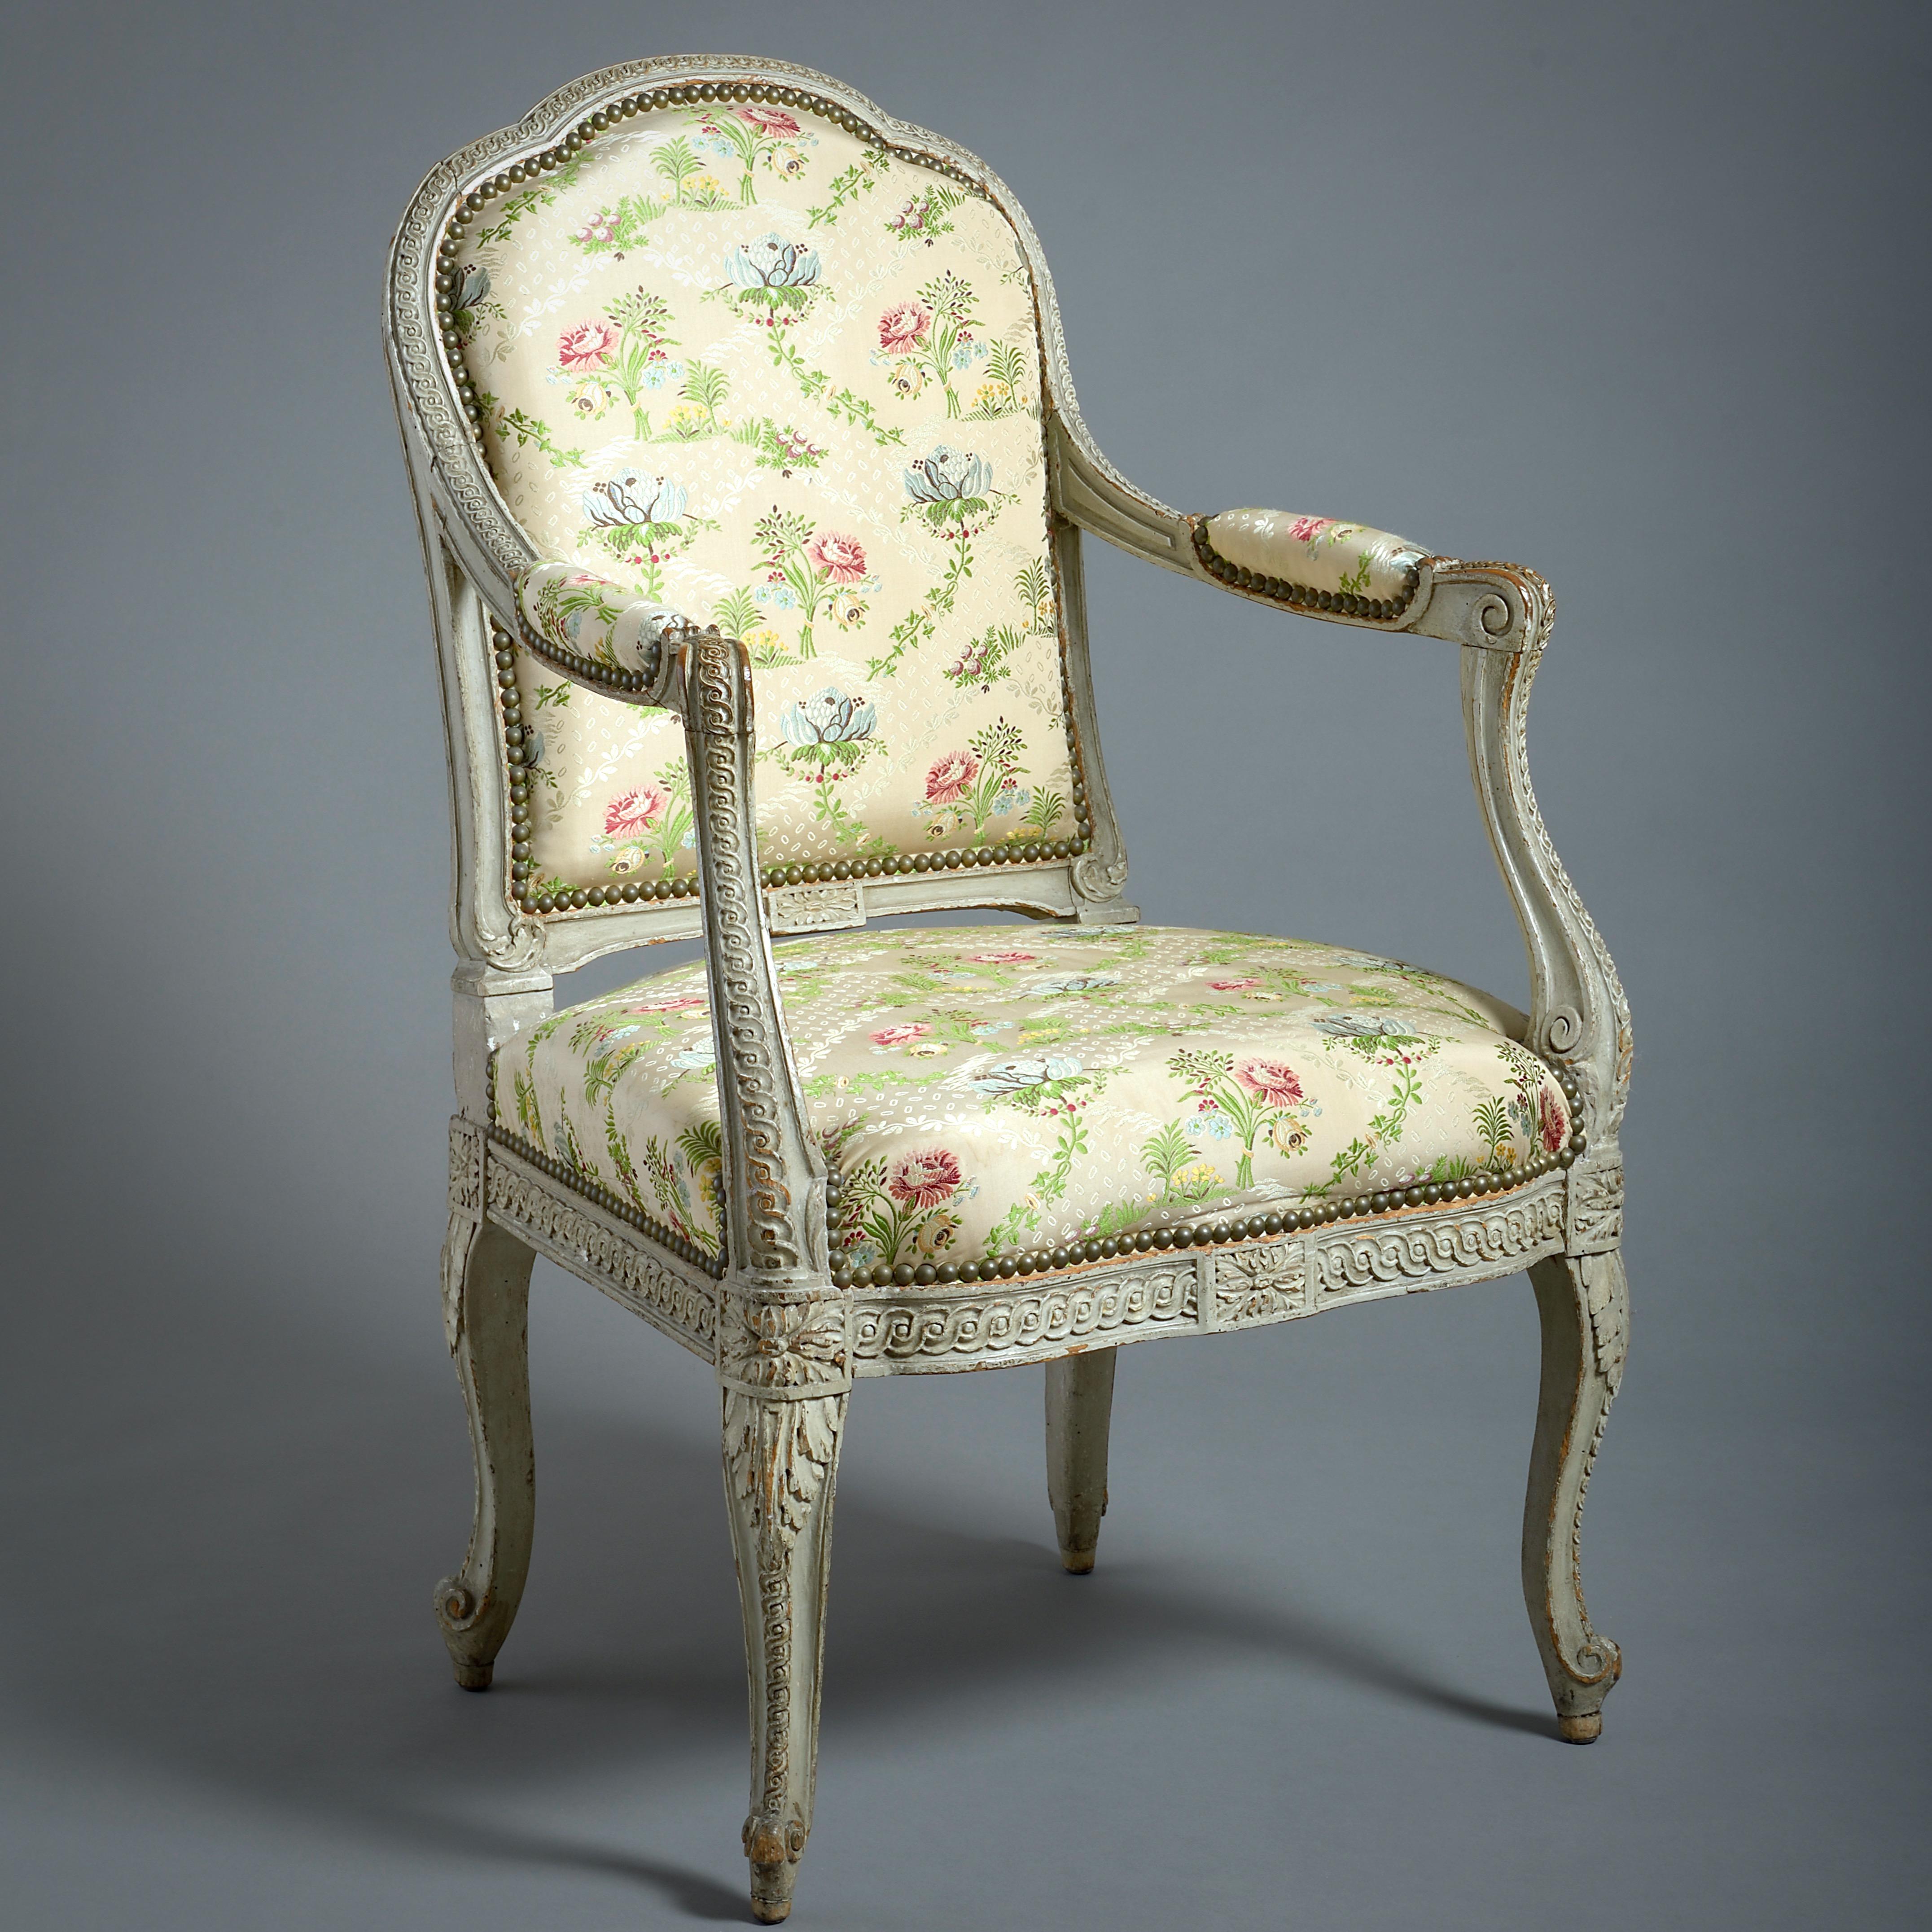 A FINE SET OF FOUR LOUIS XV / LOUIS XVI TRANSITIONAL GREY-PAINTED FAUTEUILS BY JEAN-BAPTISTE GOURDIN, CIRCA 1770.

Each stamped I GOURDIN. Each with it’s original decoration.